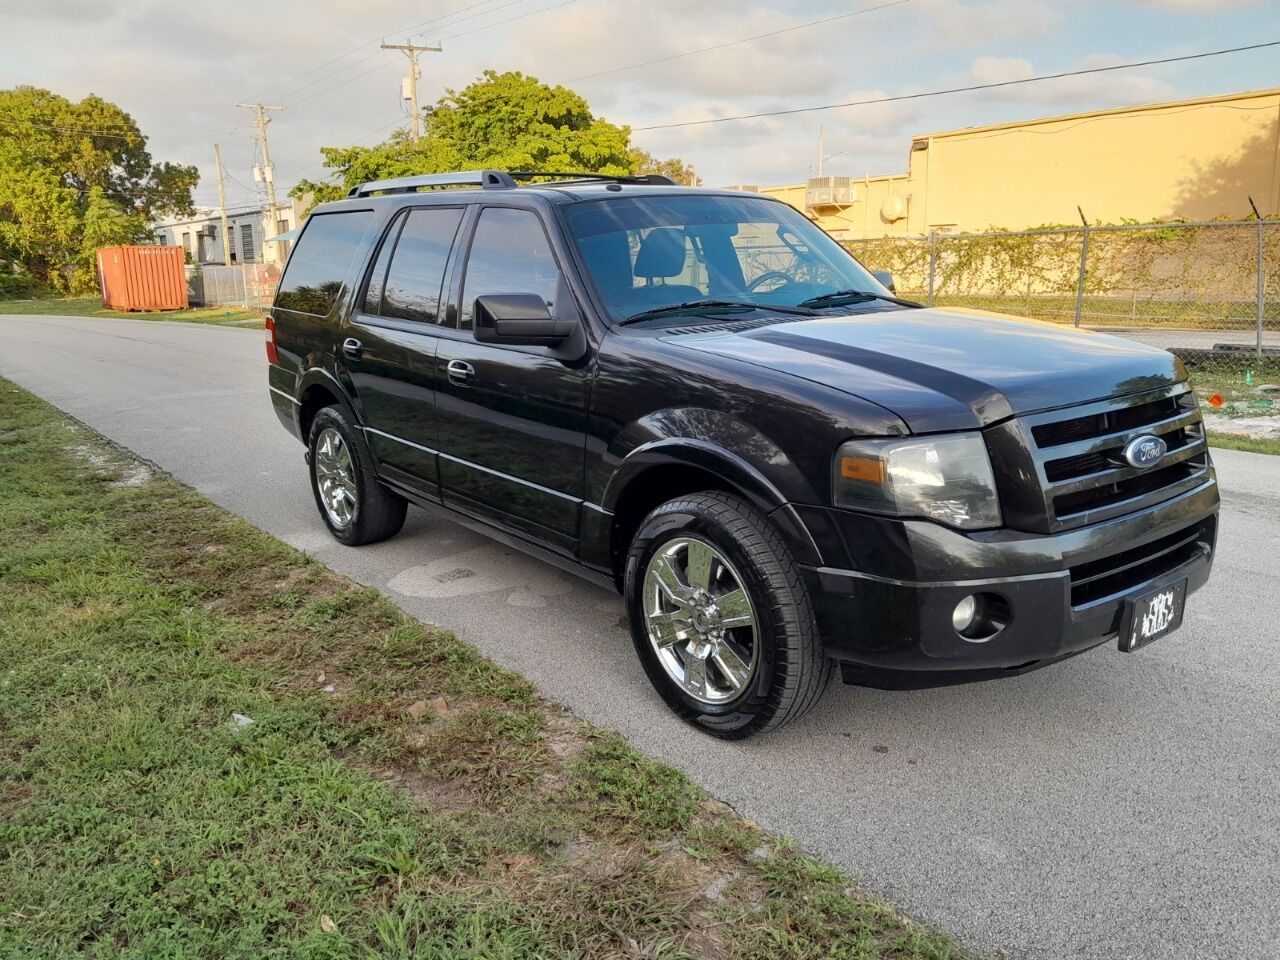 2010 Ford Expedition SUV / Crossover - $5,950